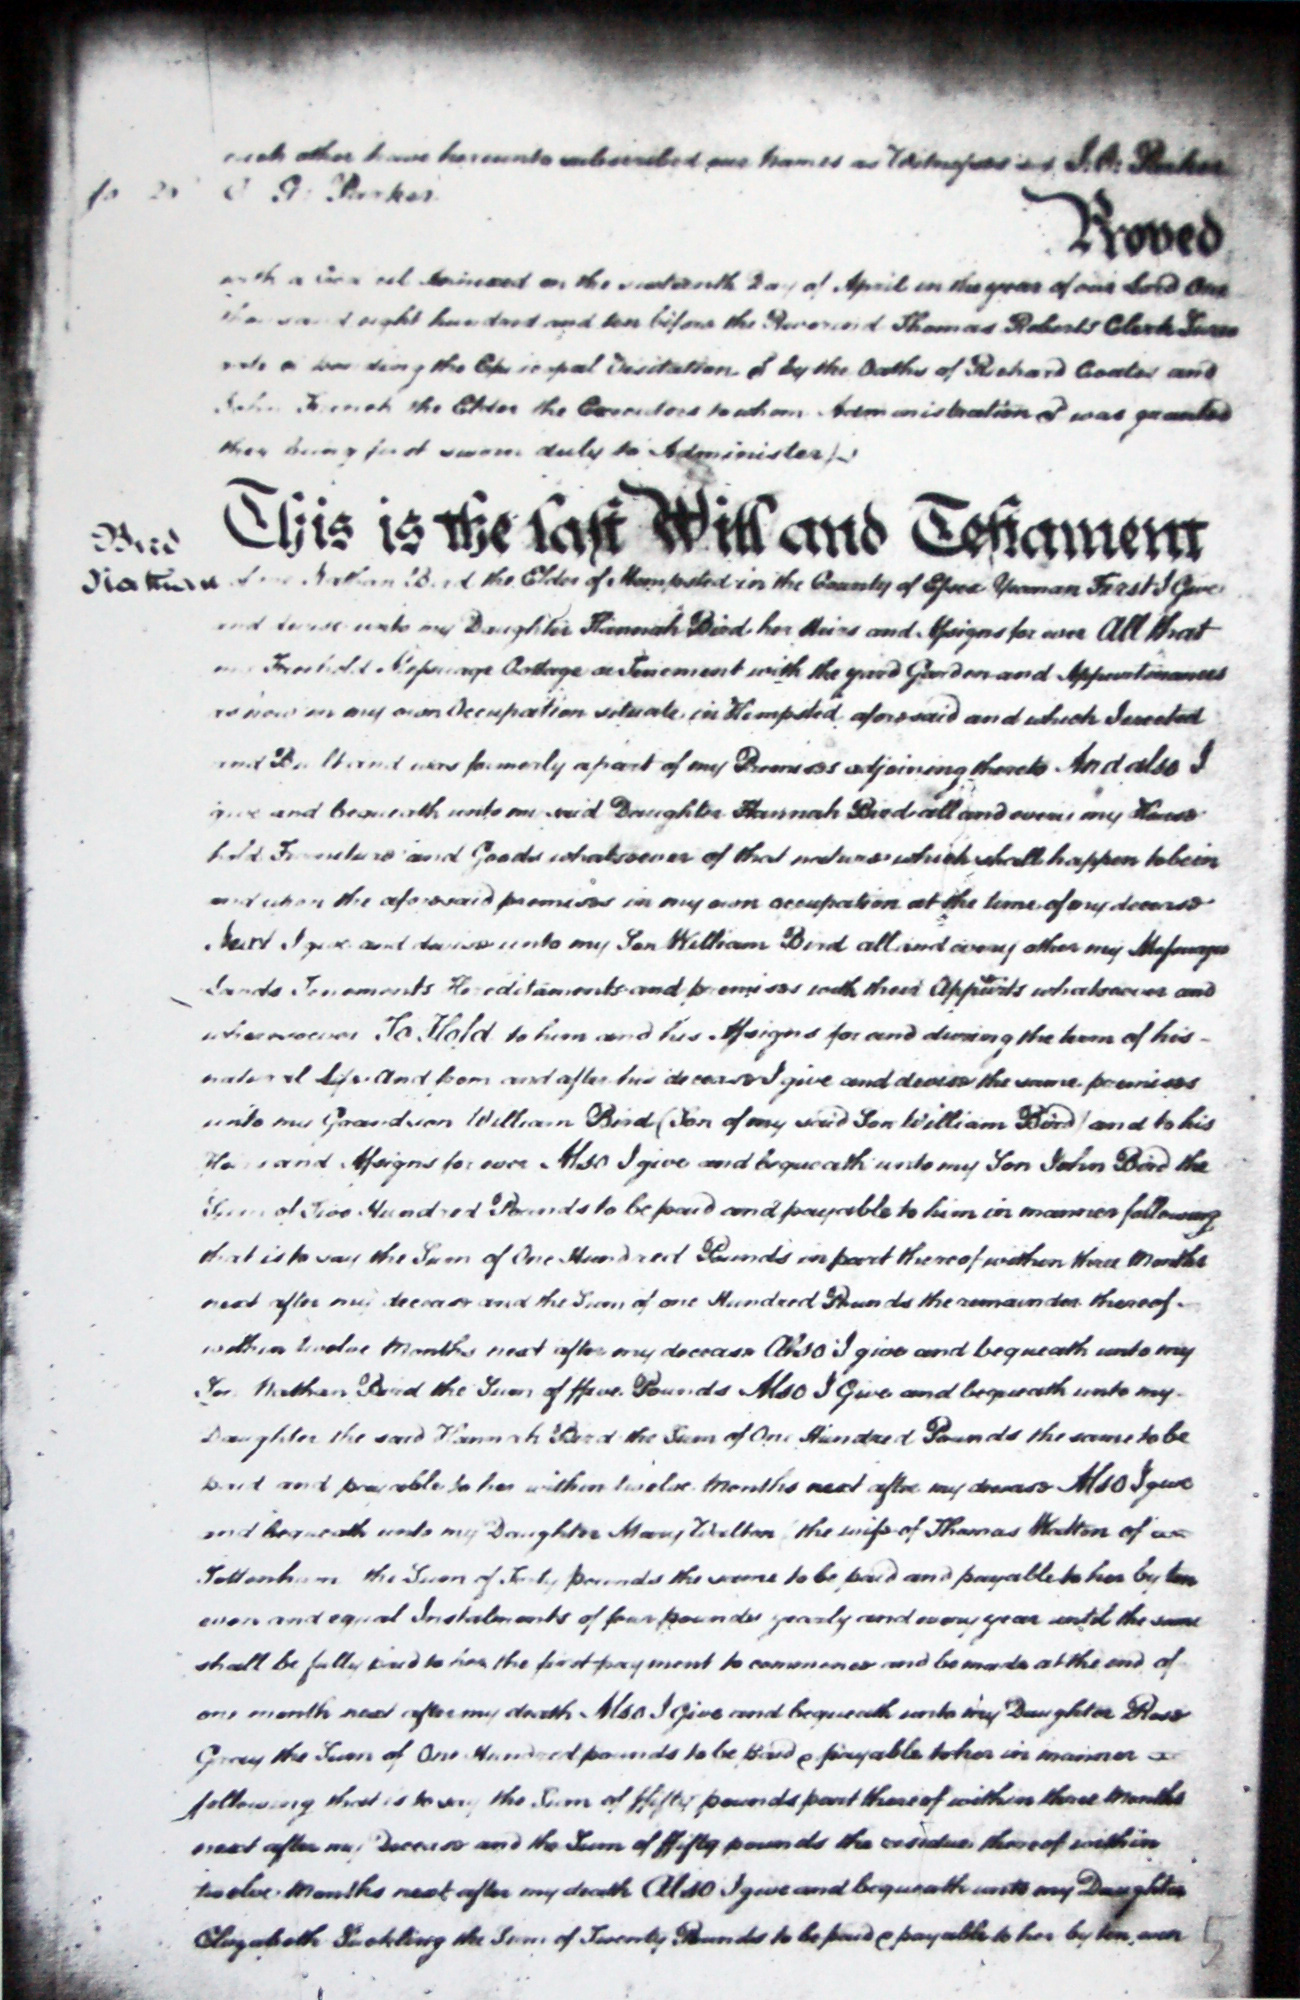 The will of Thomas Frederick Balls, page 5 in which the will was proved on the 19th April 1810